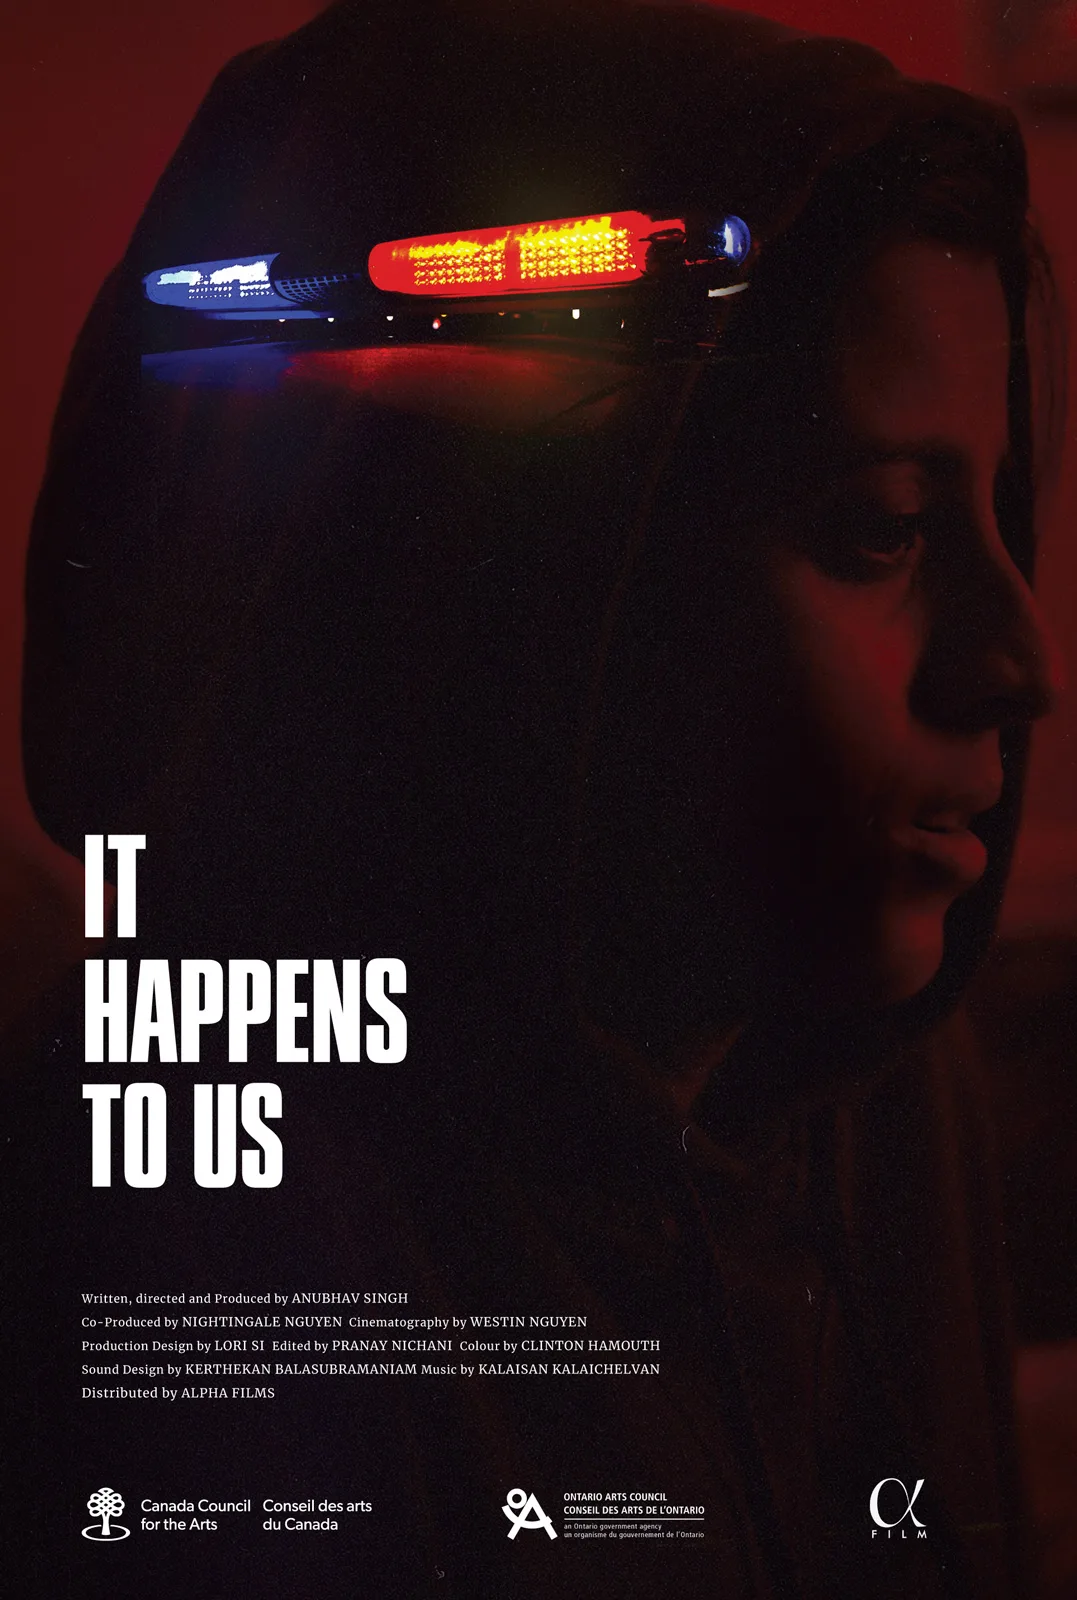 Poster of the short film "It happens to us" by Anubhav Singh